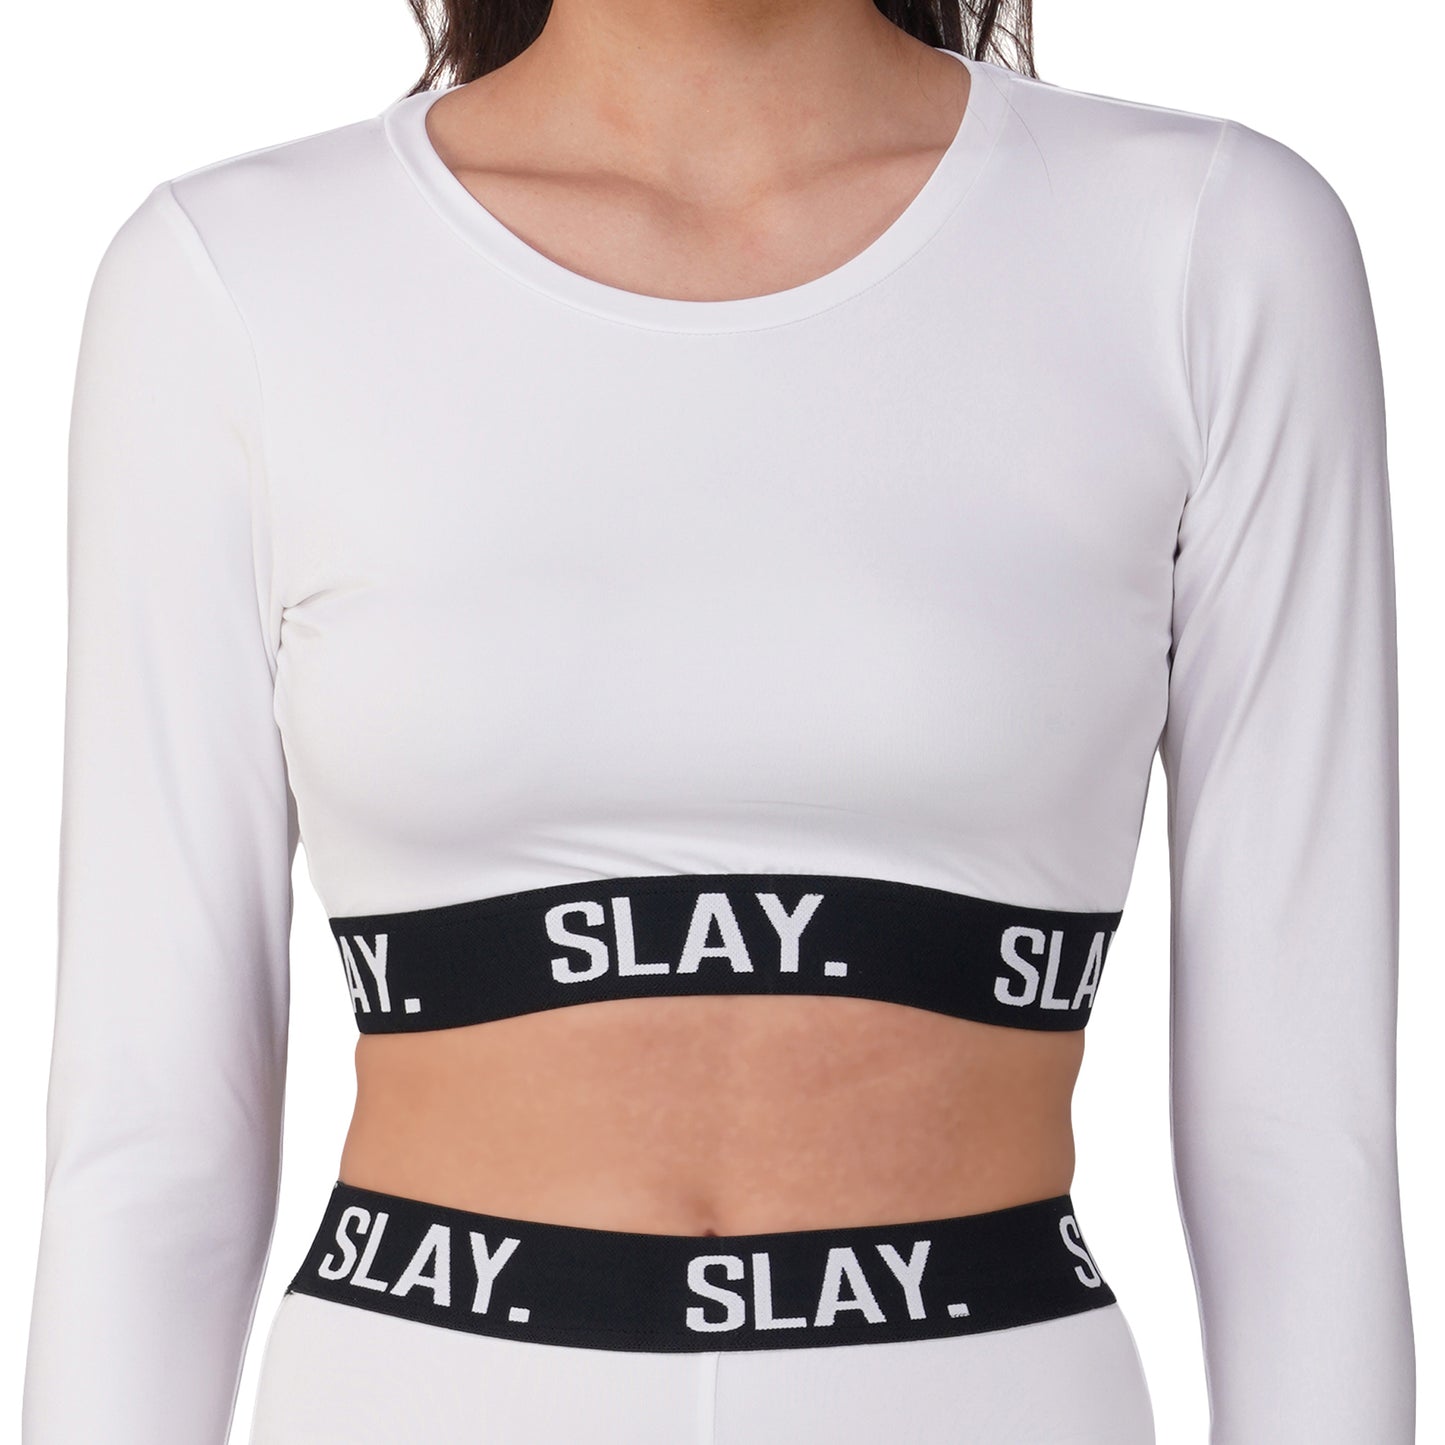 SLAY. Sport Women's Activewear Full Sleeves Crop Top And Pants Co-ord Set White